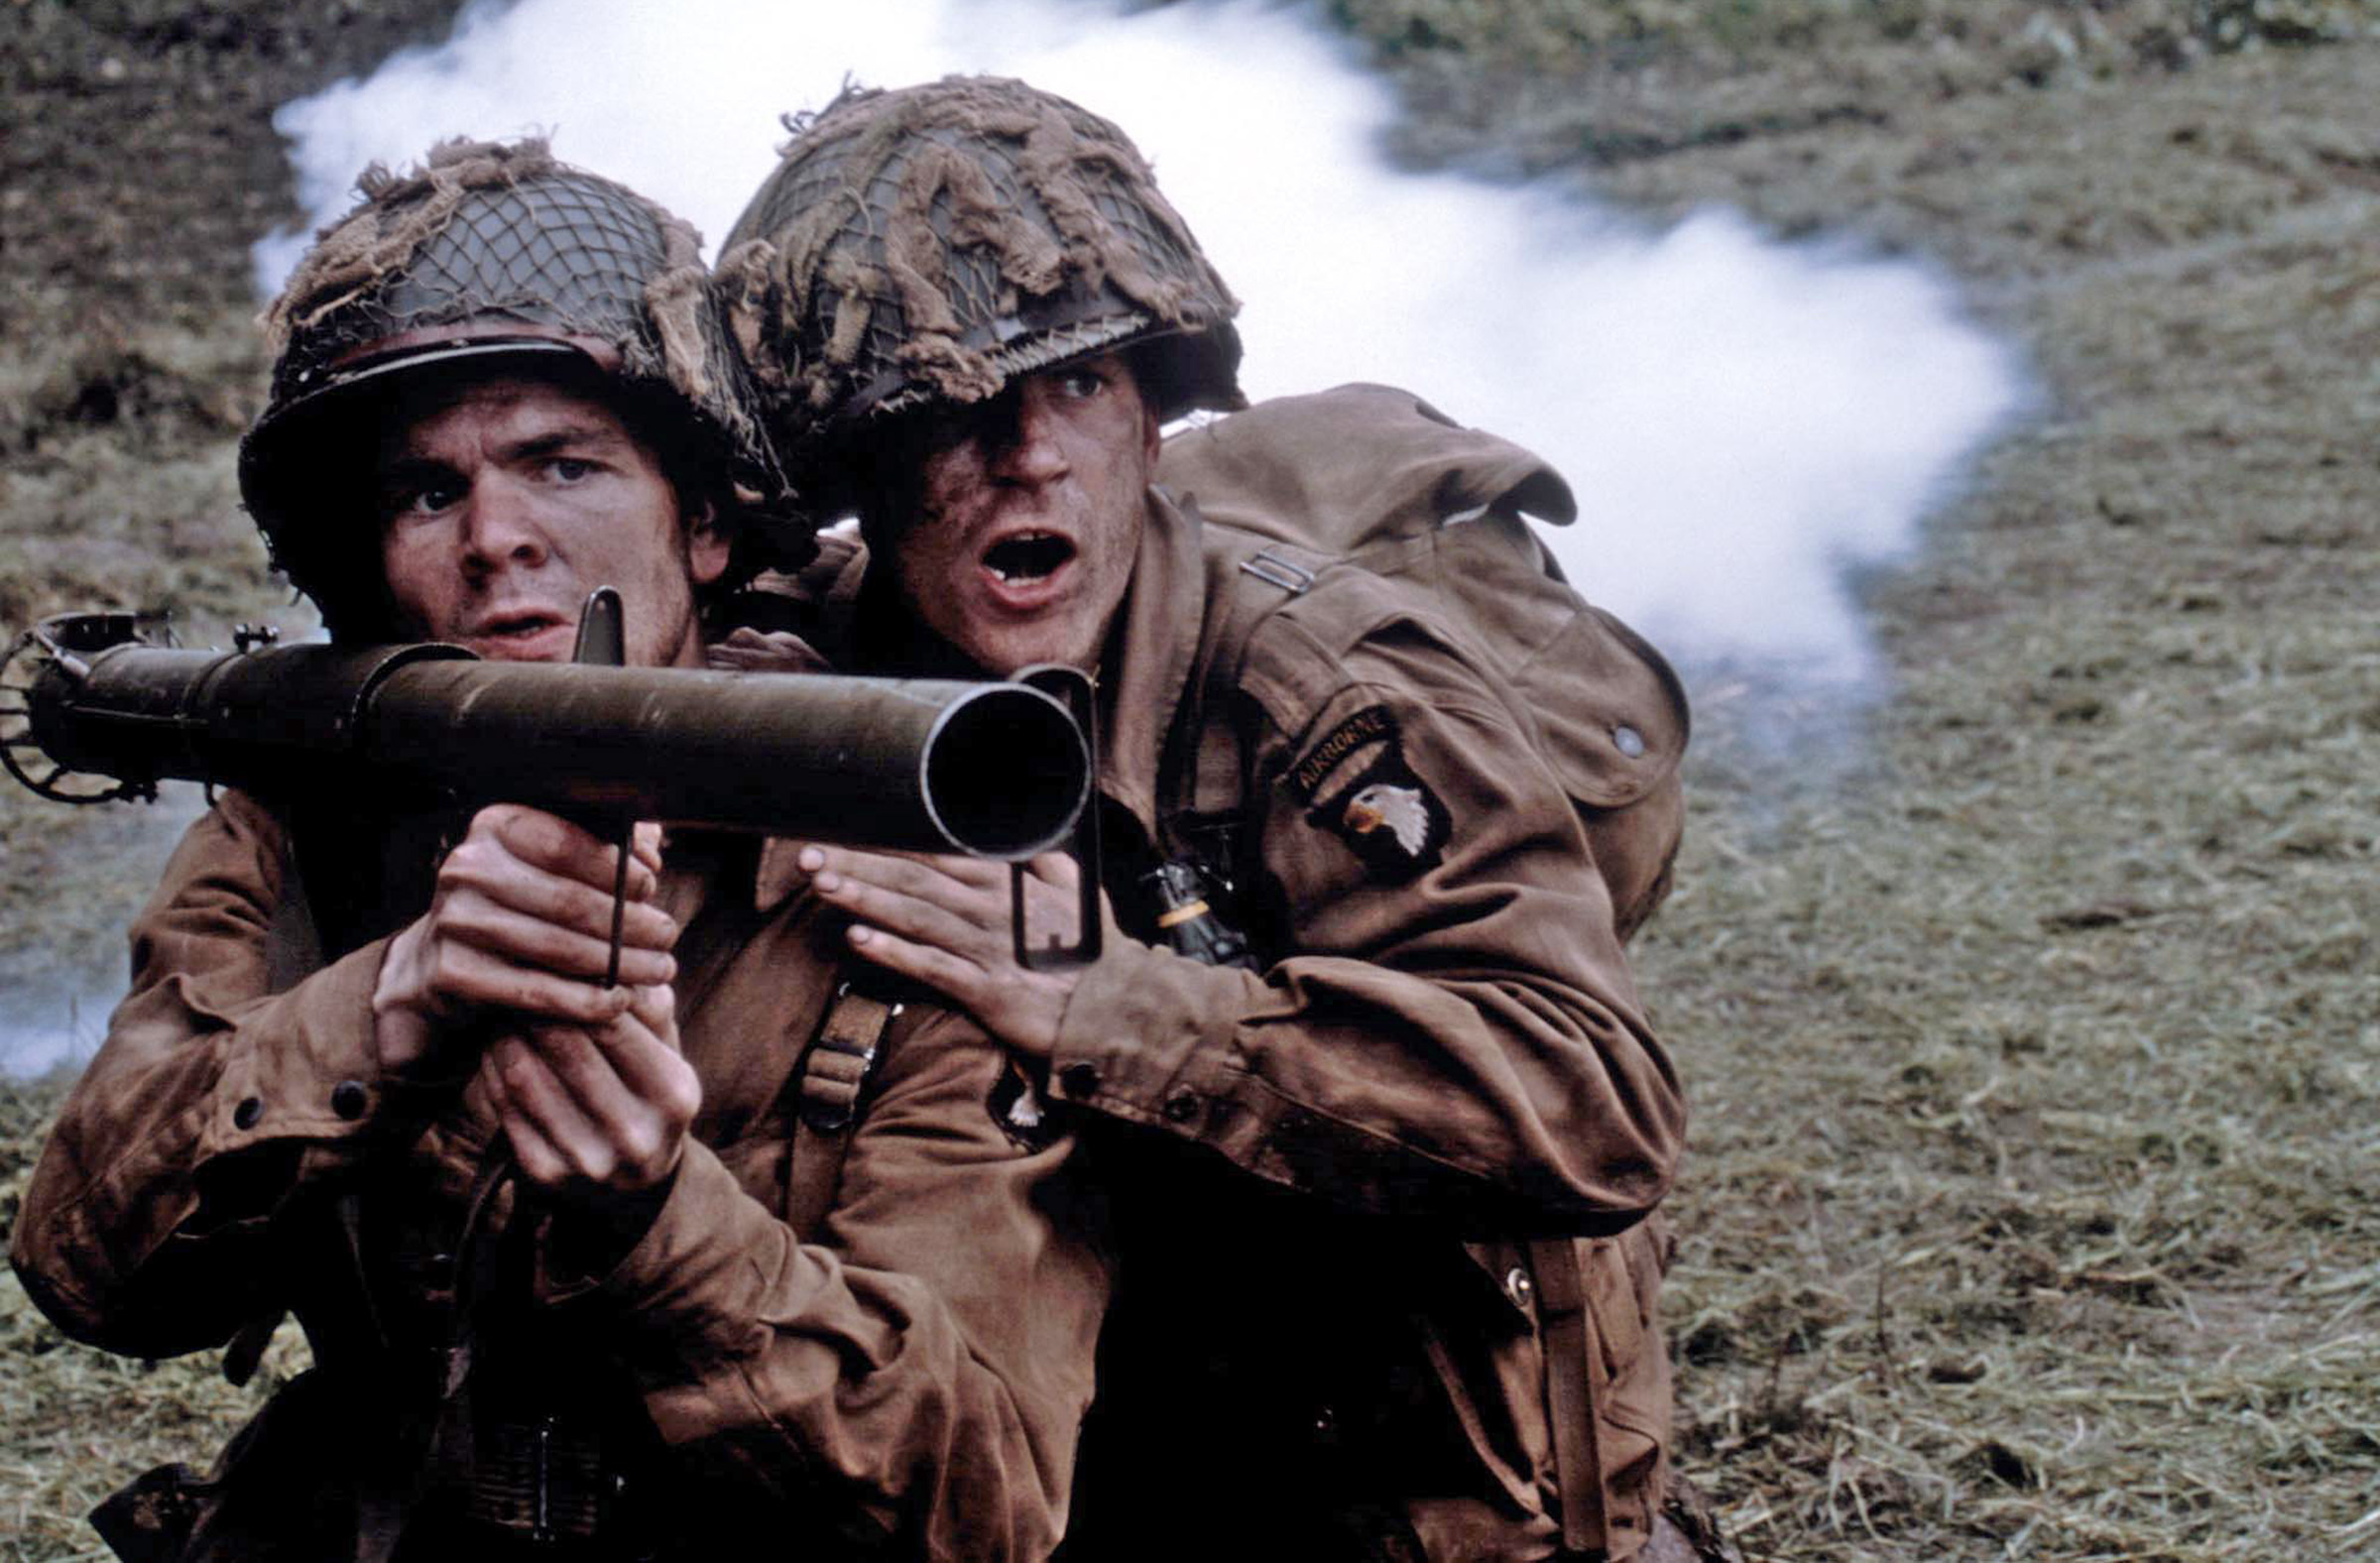 band of brothers, War, Military, Action, Drama, Hbo, Band, Brothers, Soldier, Battle, Weapon Wallpaper